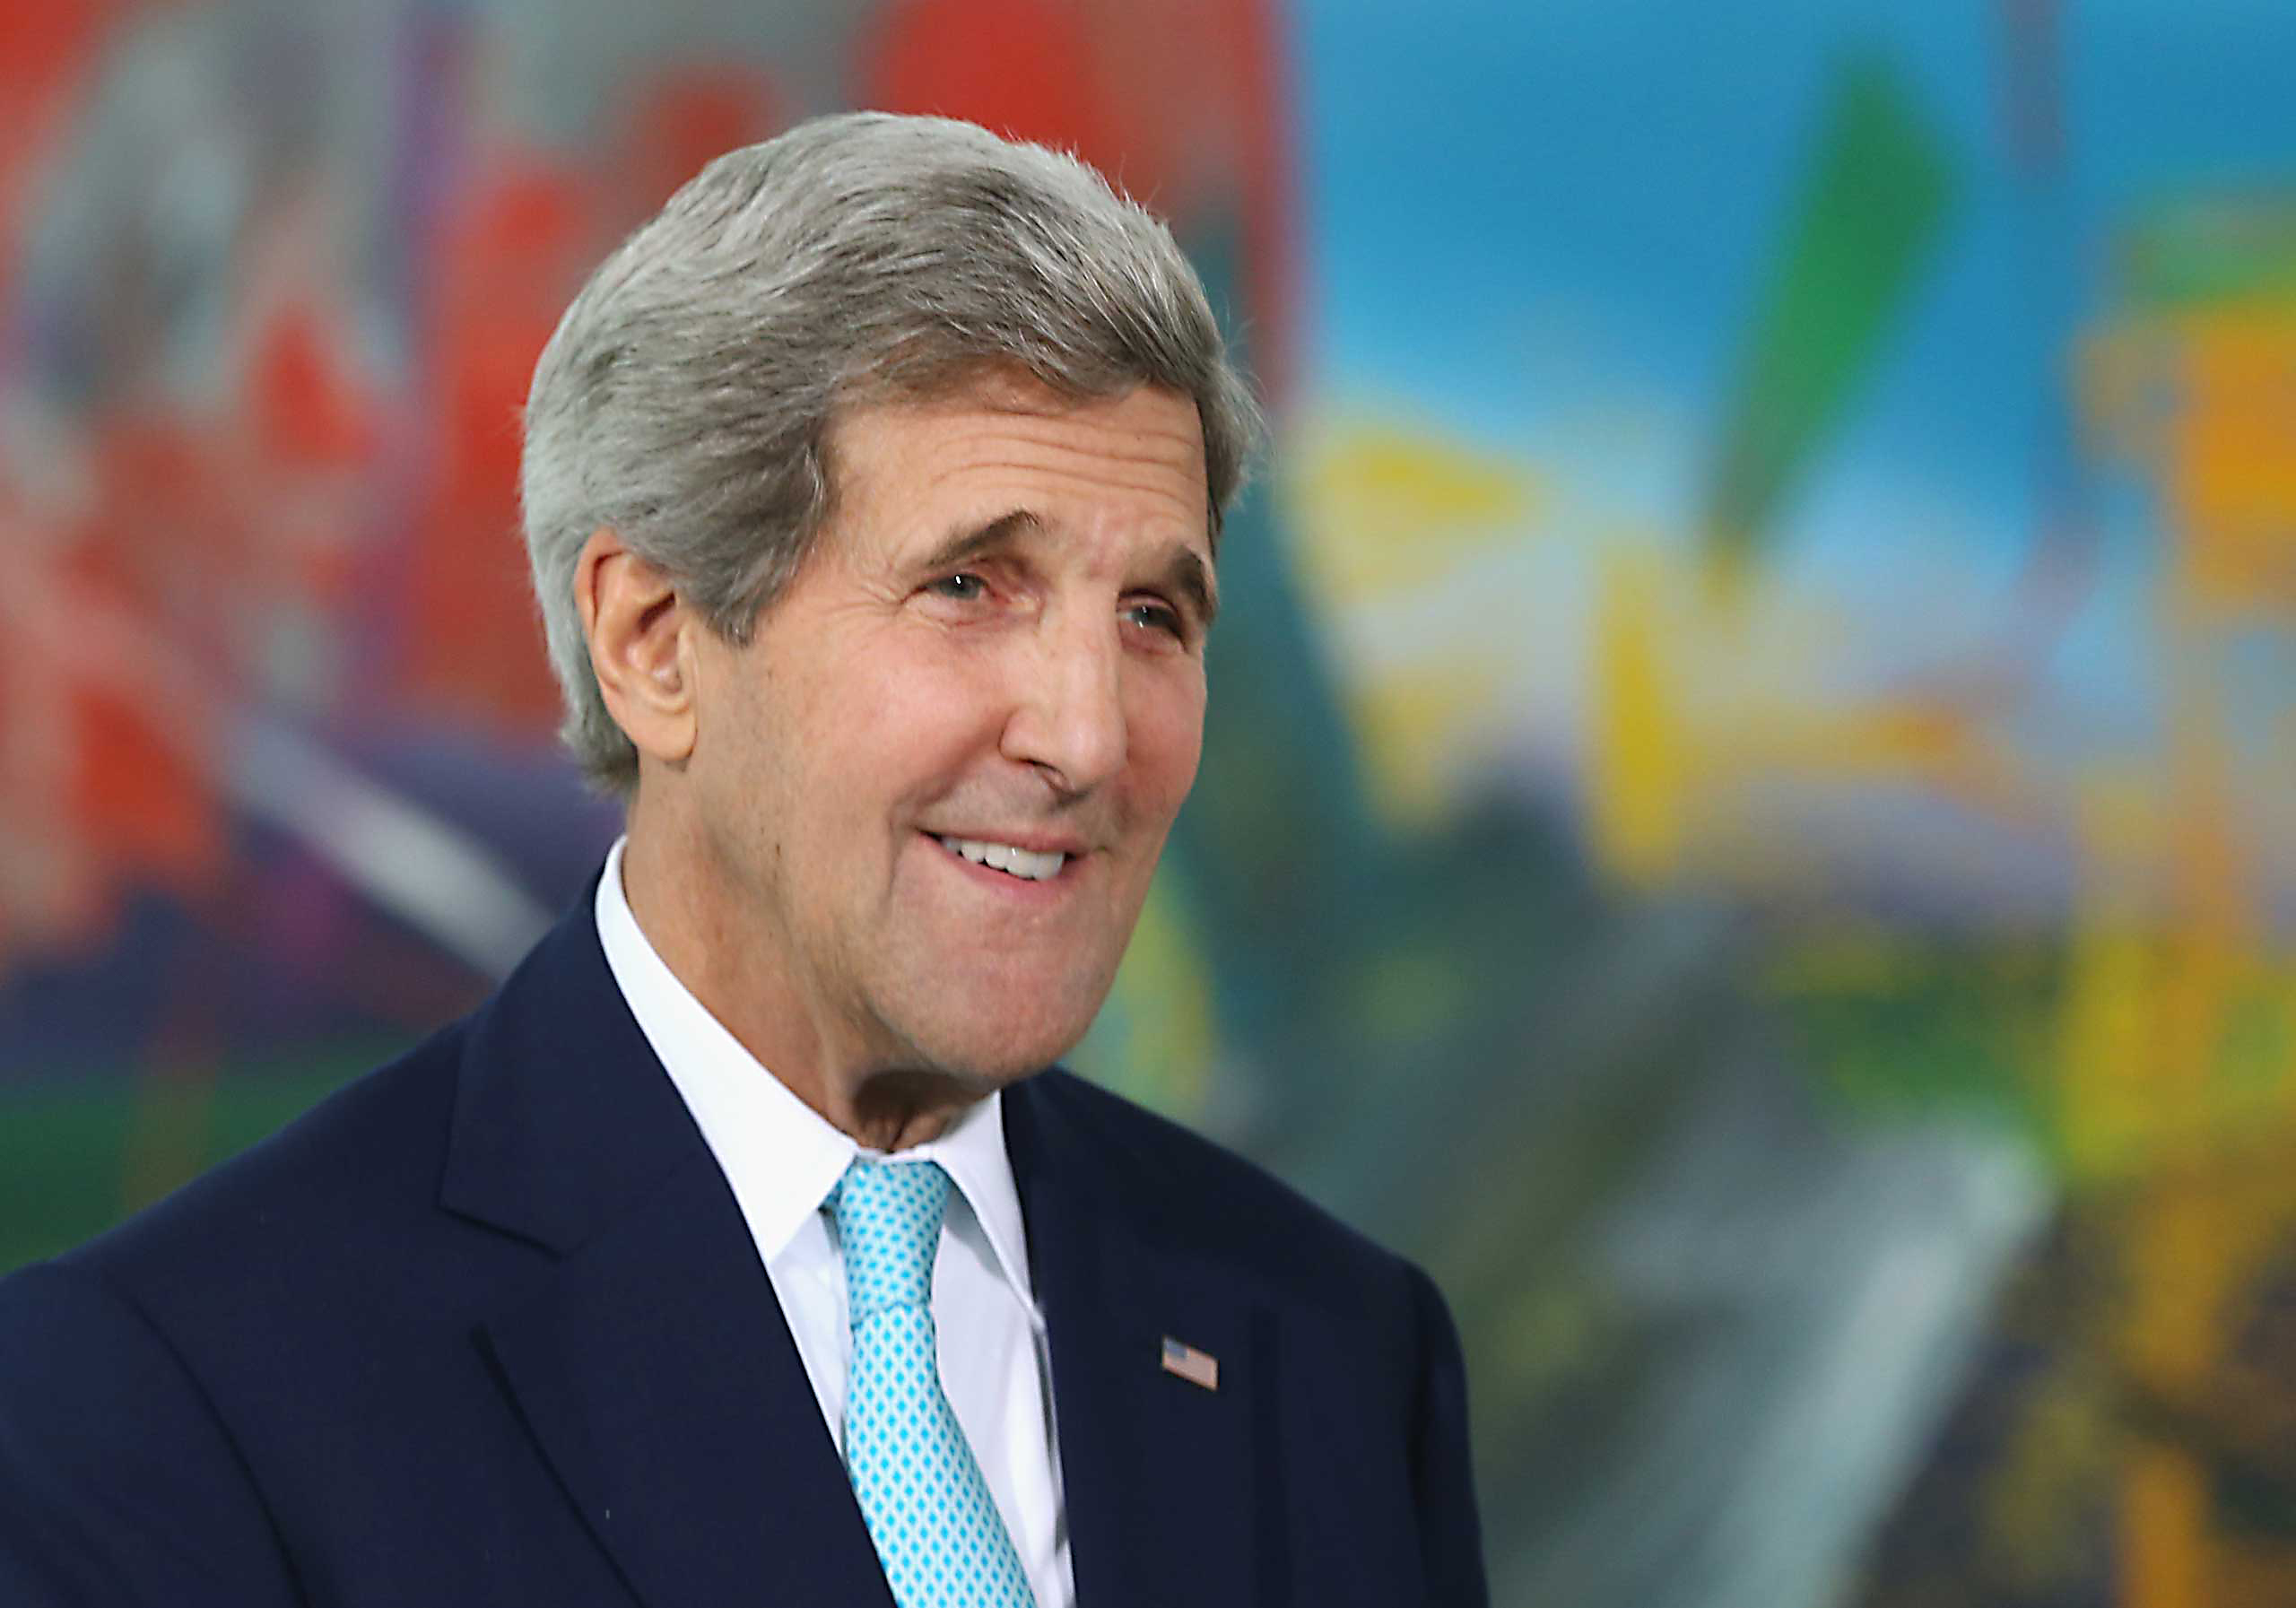 U.S. Secretary of State John Kerry at the Chancellery in Berlin on Oct. 22, 2014. (Pool/Getty Images)